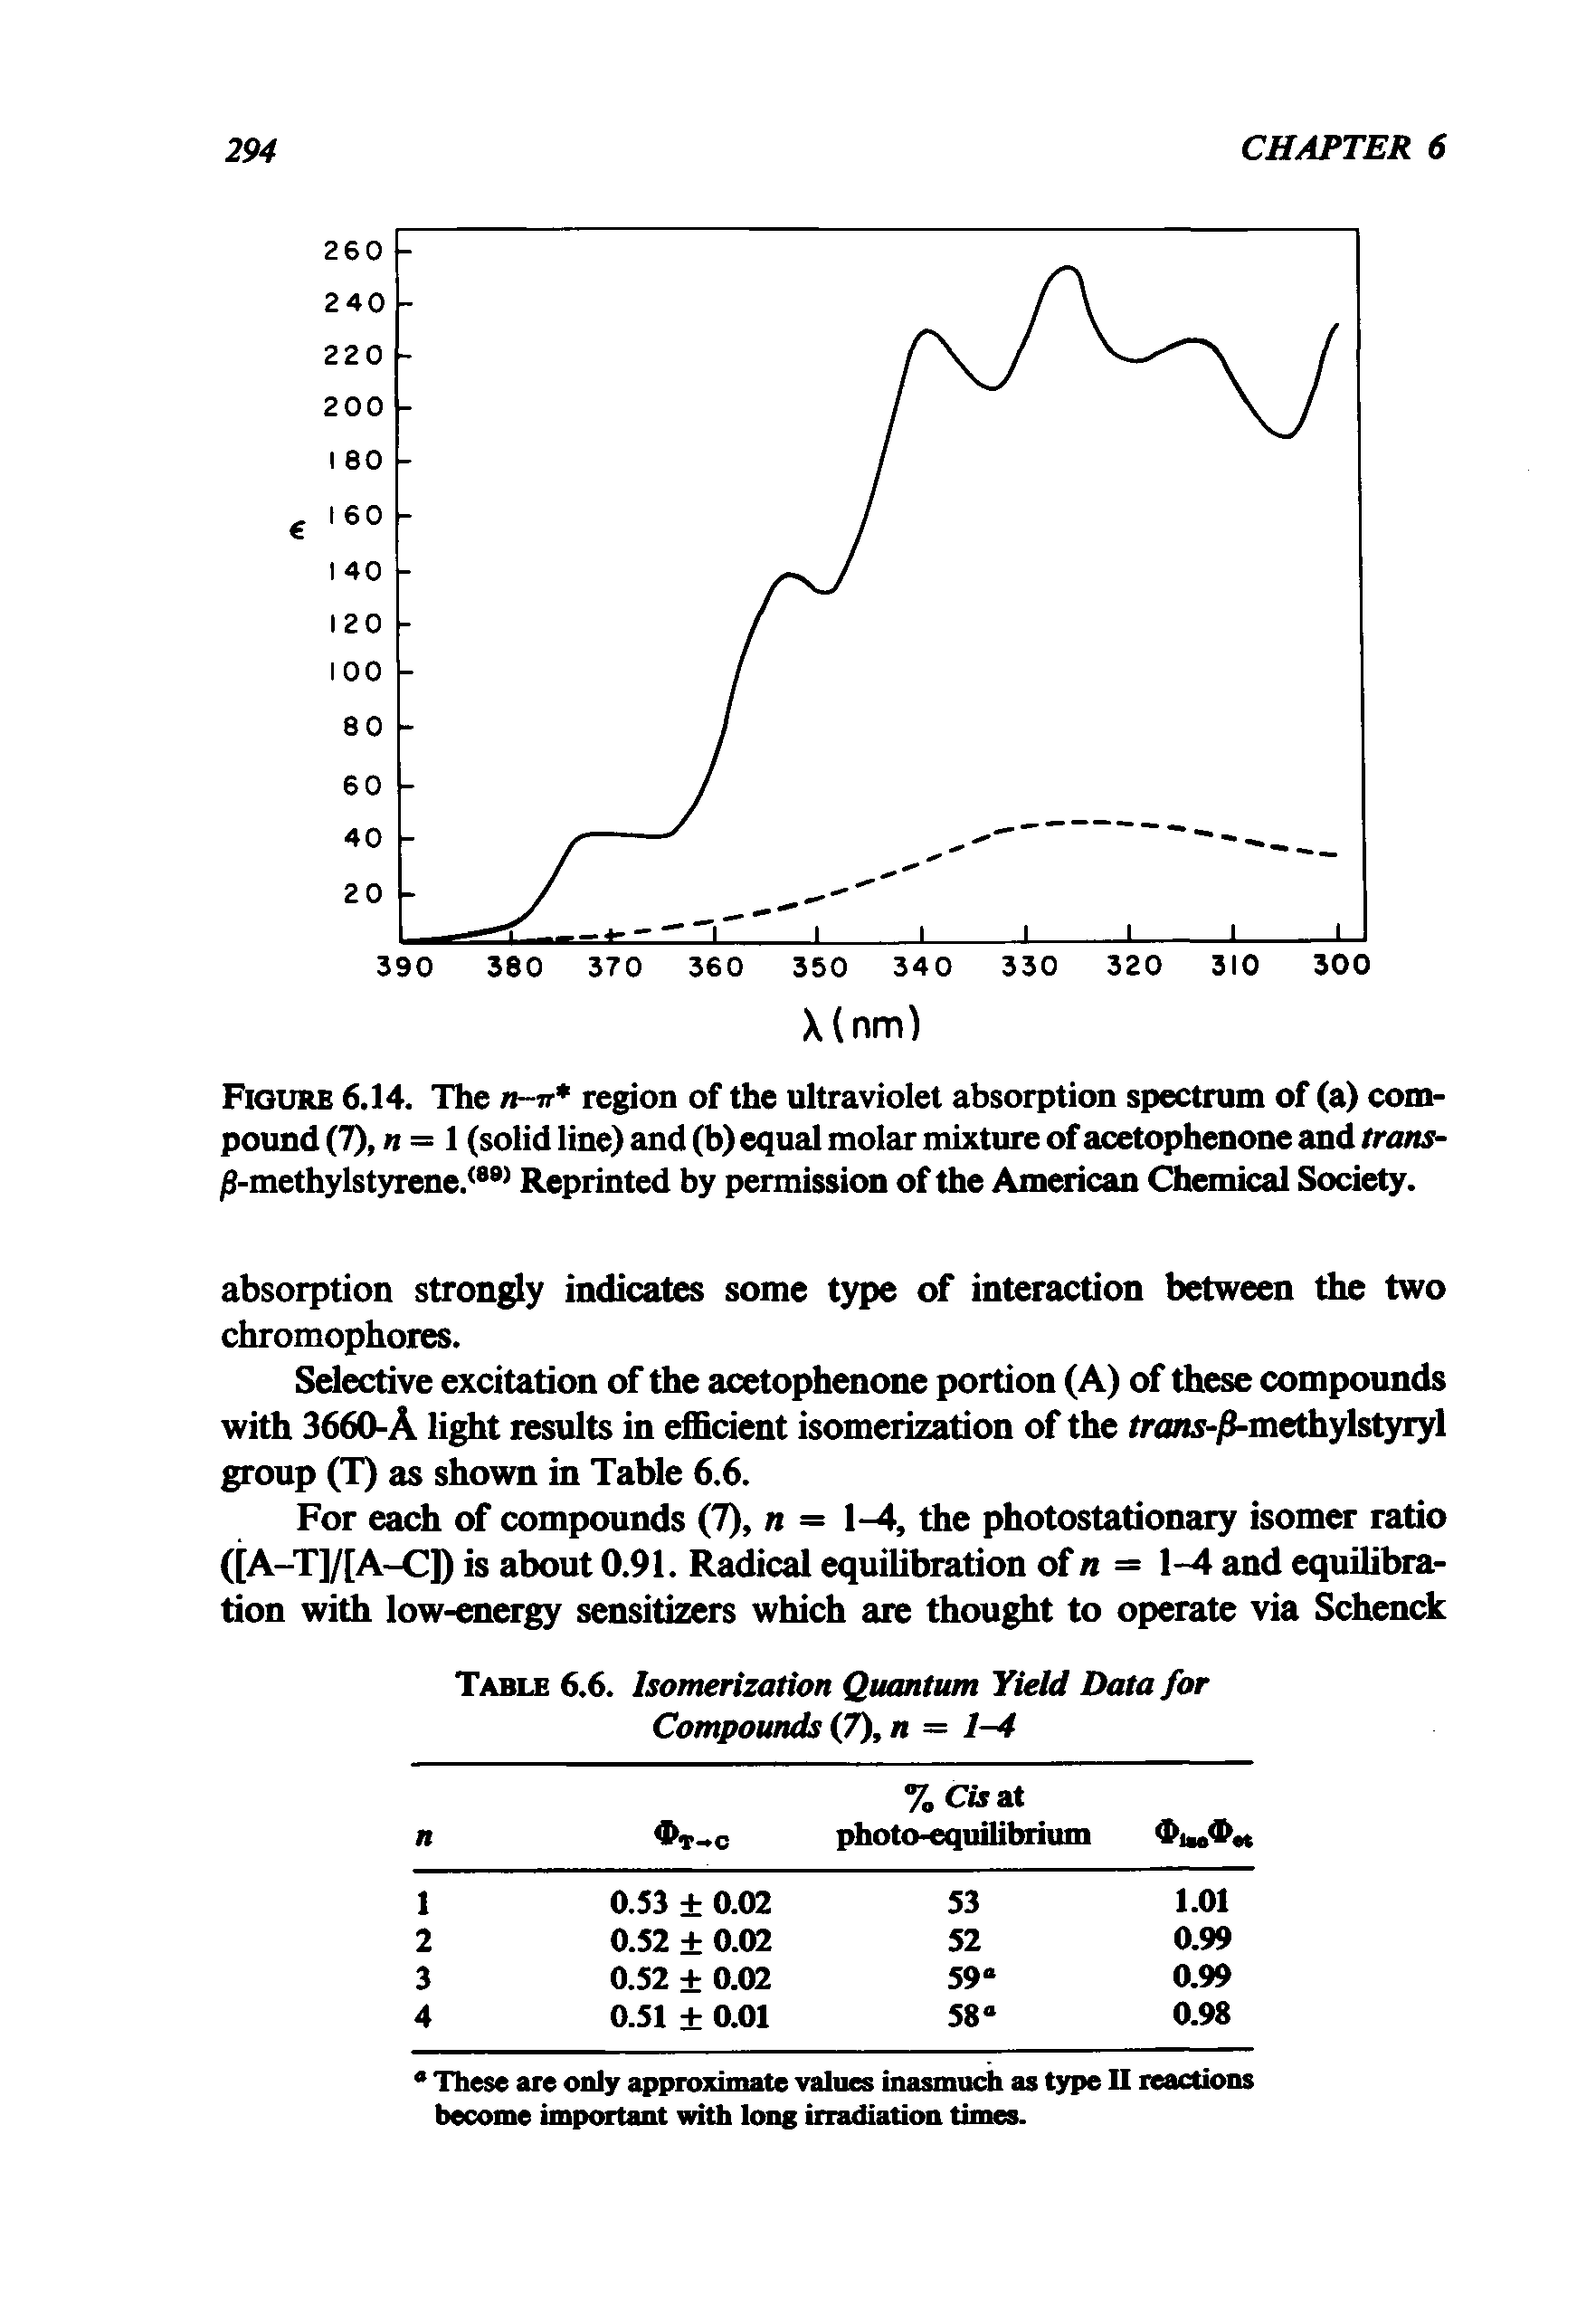 Figure 6.14. The n-n region of the ultraviolet absorption spectrum of (a) compound (7), n = 1 (solid line) and (b) equal molar mixture of acetophenone and trans-/3-methylstyrene.<89) Reprinted by permission of the American Chemical Society.